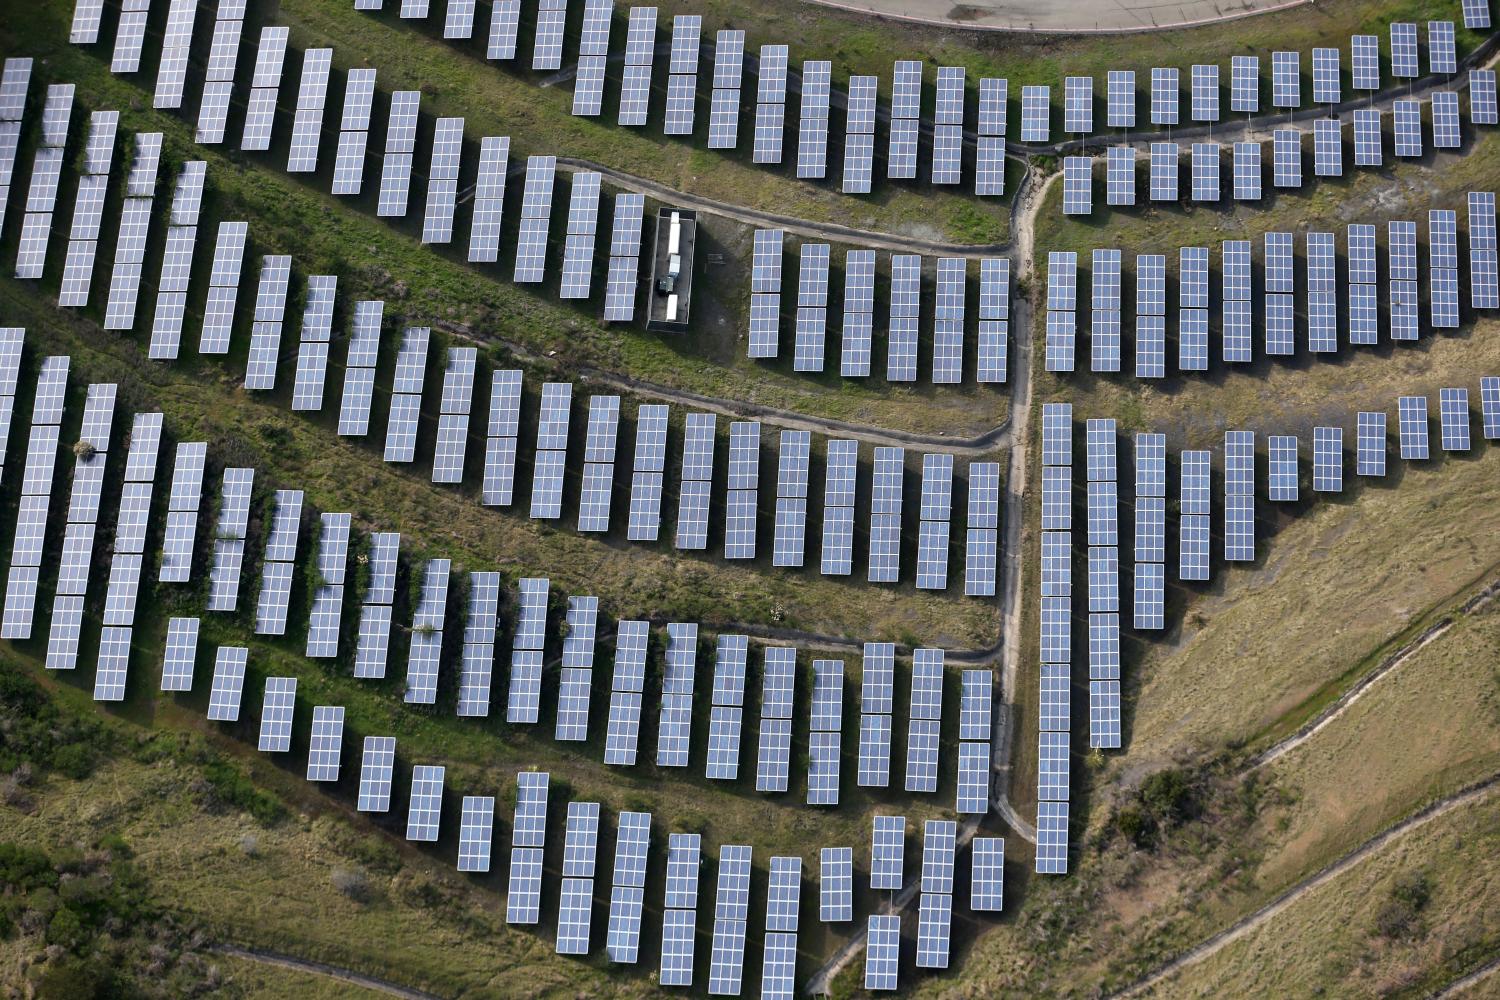 An array of solar panels are seen in Oakland, California, U.S. December 4, 2016. REUTERS/Lucy Nicholson - RTSUNG0